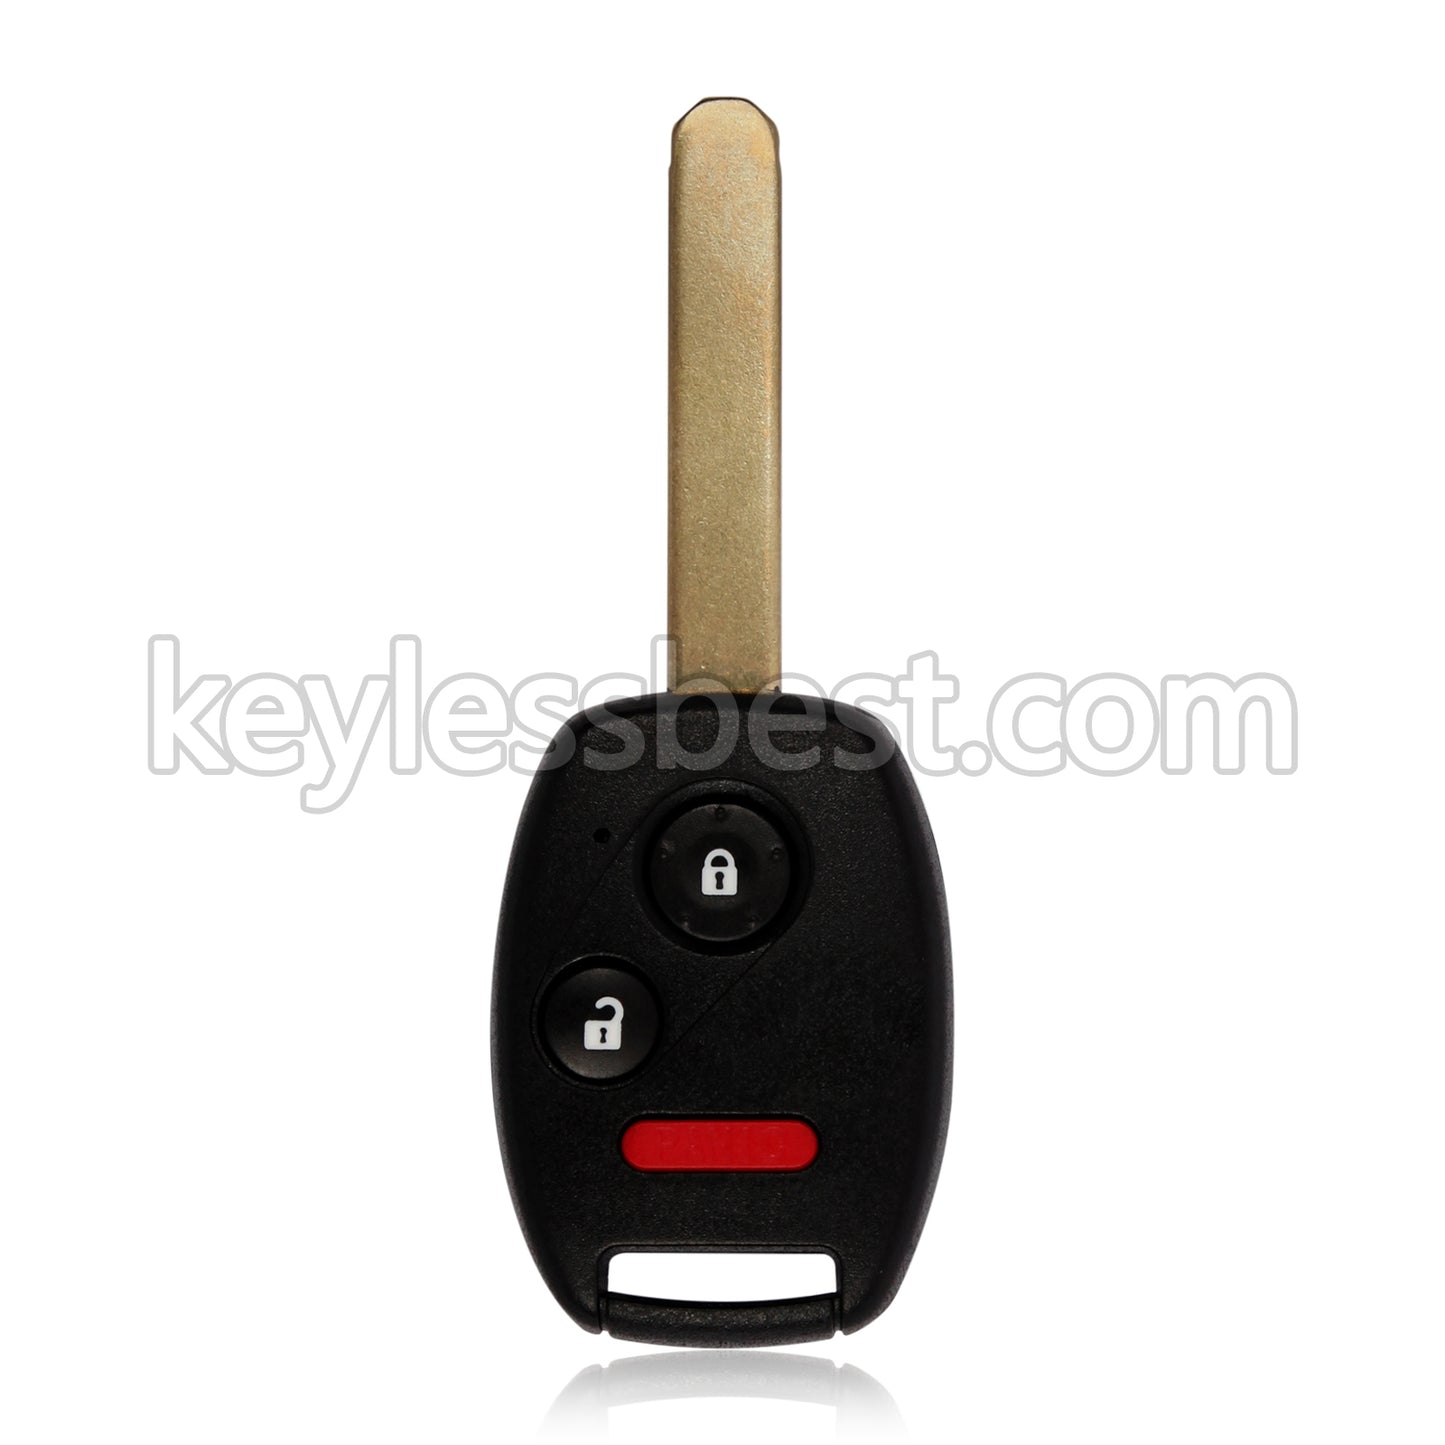 2005-2014 Honda Odyssey Ridgeline Fit / 3 Buttons Remote Key / OUCG8D-380H-A / 313.8MHz